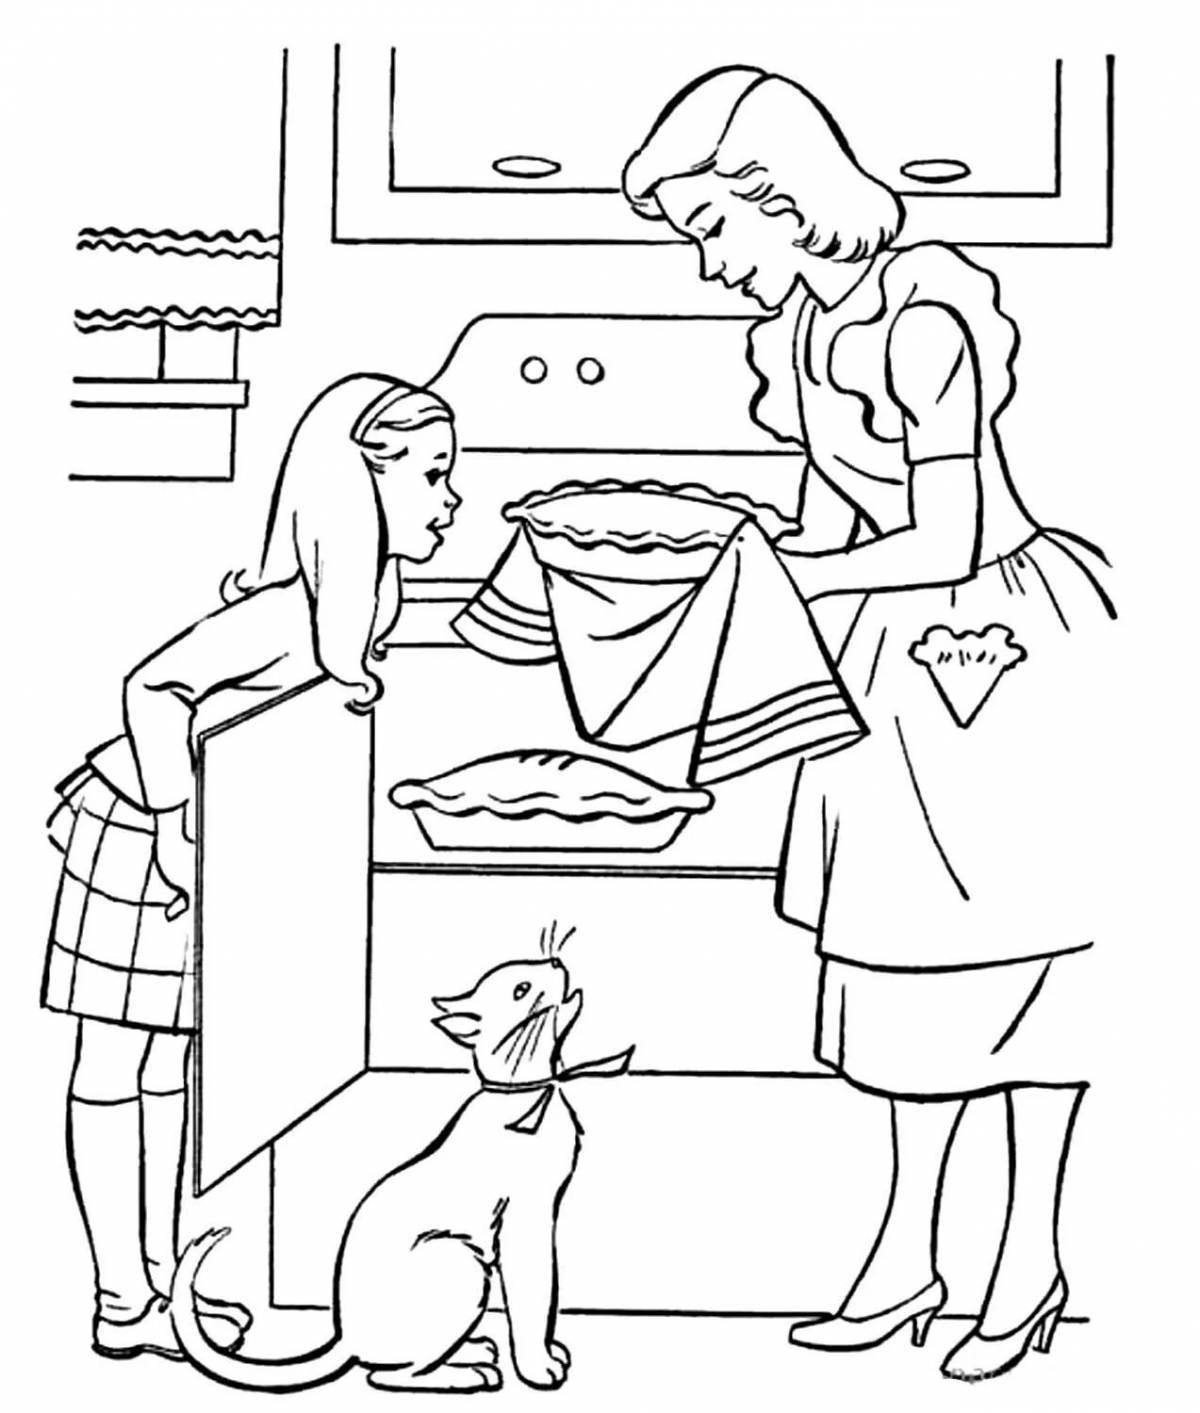 Color-blast my mum coloring page